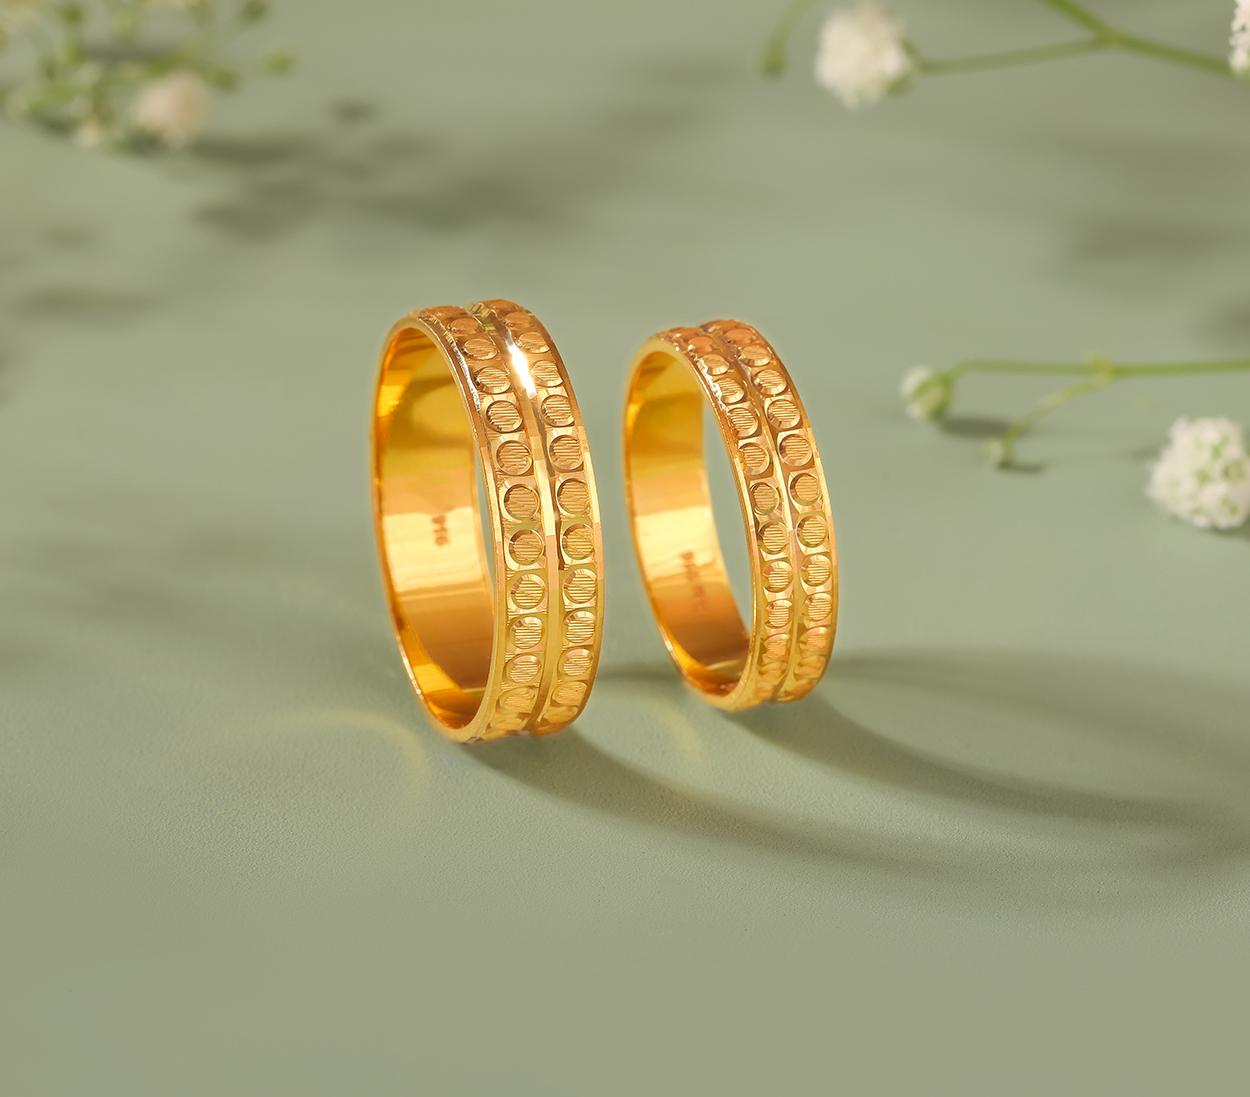 Matching Wedding Bands With Unique Twisted Design. Gold Rings Set. Couple  Wedding Rings. Gold Bands With Diamonds. Unusual Wedding Bands - Etsy